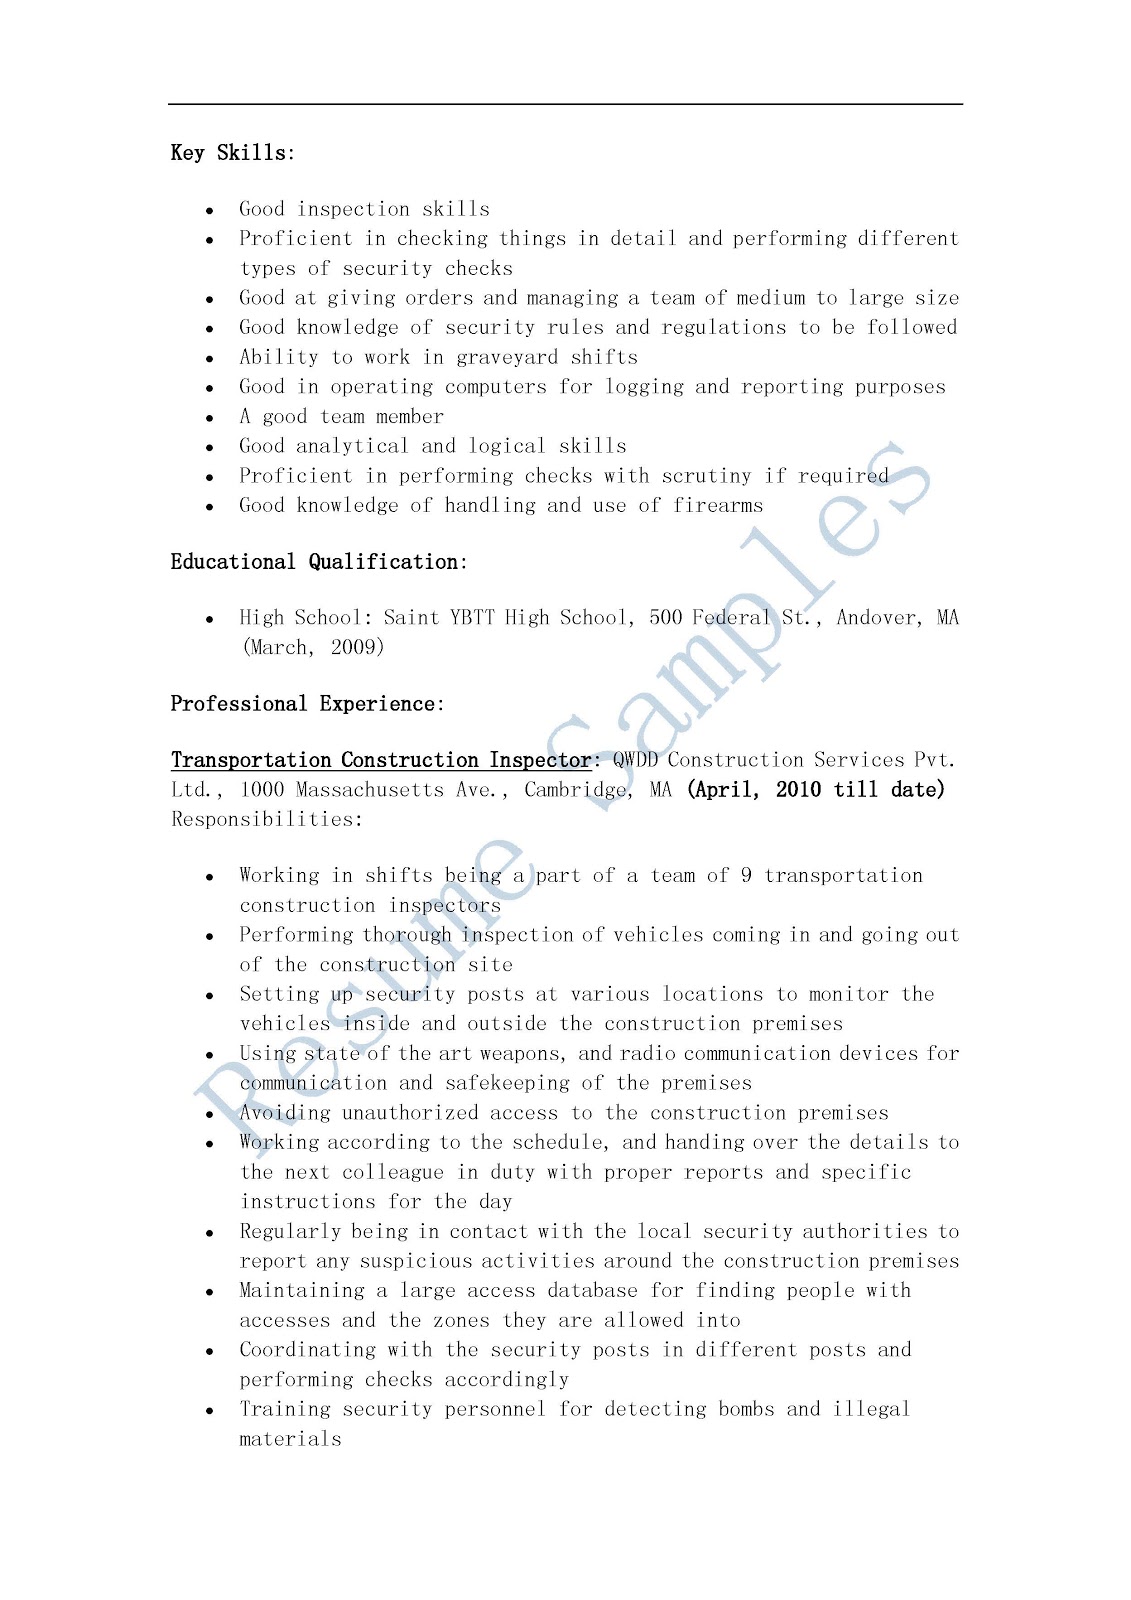 Building material sales cover letter